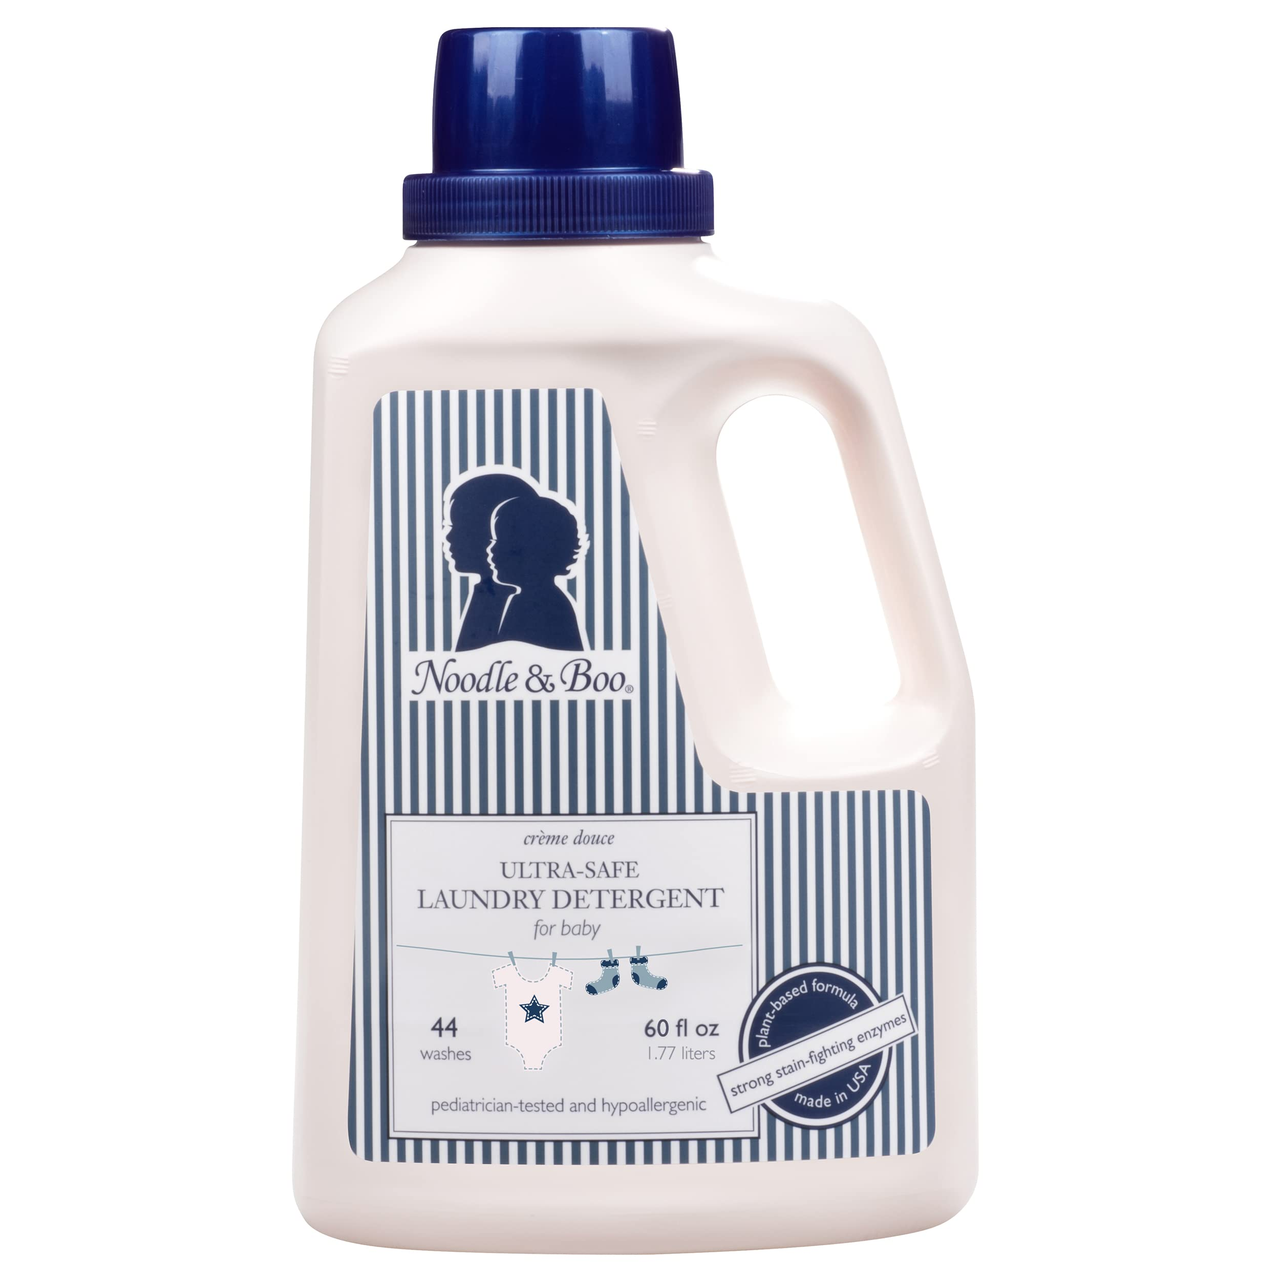 Noodle & Boo Baby Laundry Essentials 超安心洗衣粉,1.77L 到手约￥209